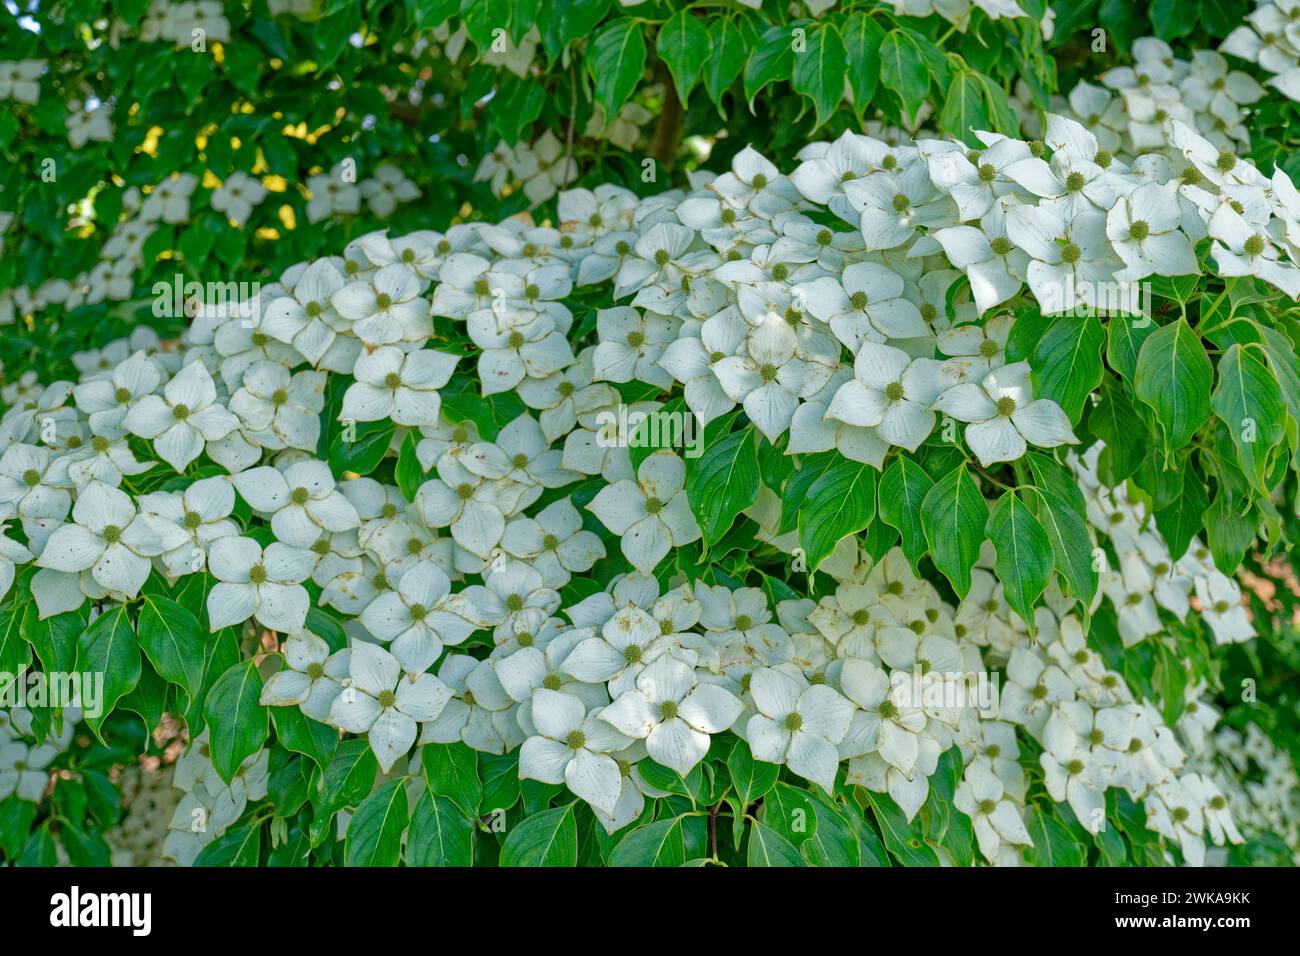 A Kousa white dogwood tree also known as a Chinese dogwood in full bloom with large white pointy flowers on branches with green foliage partial view c Stock Photo